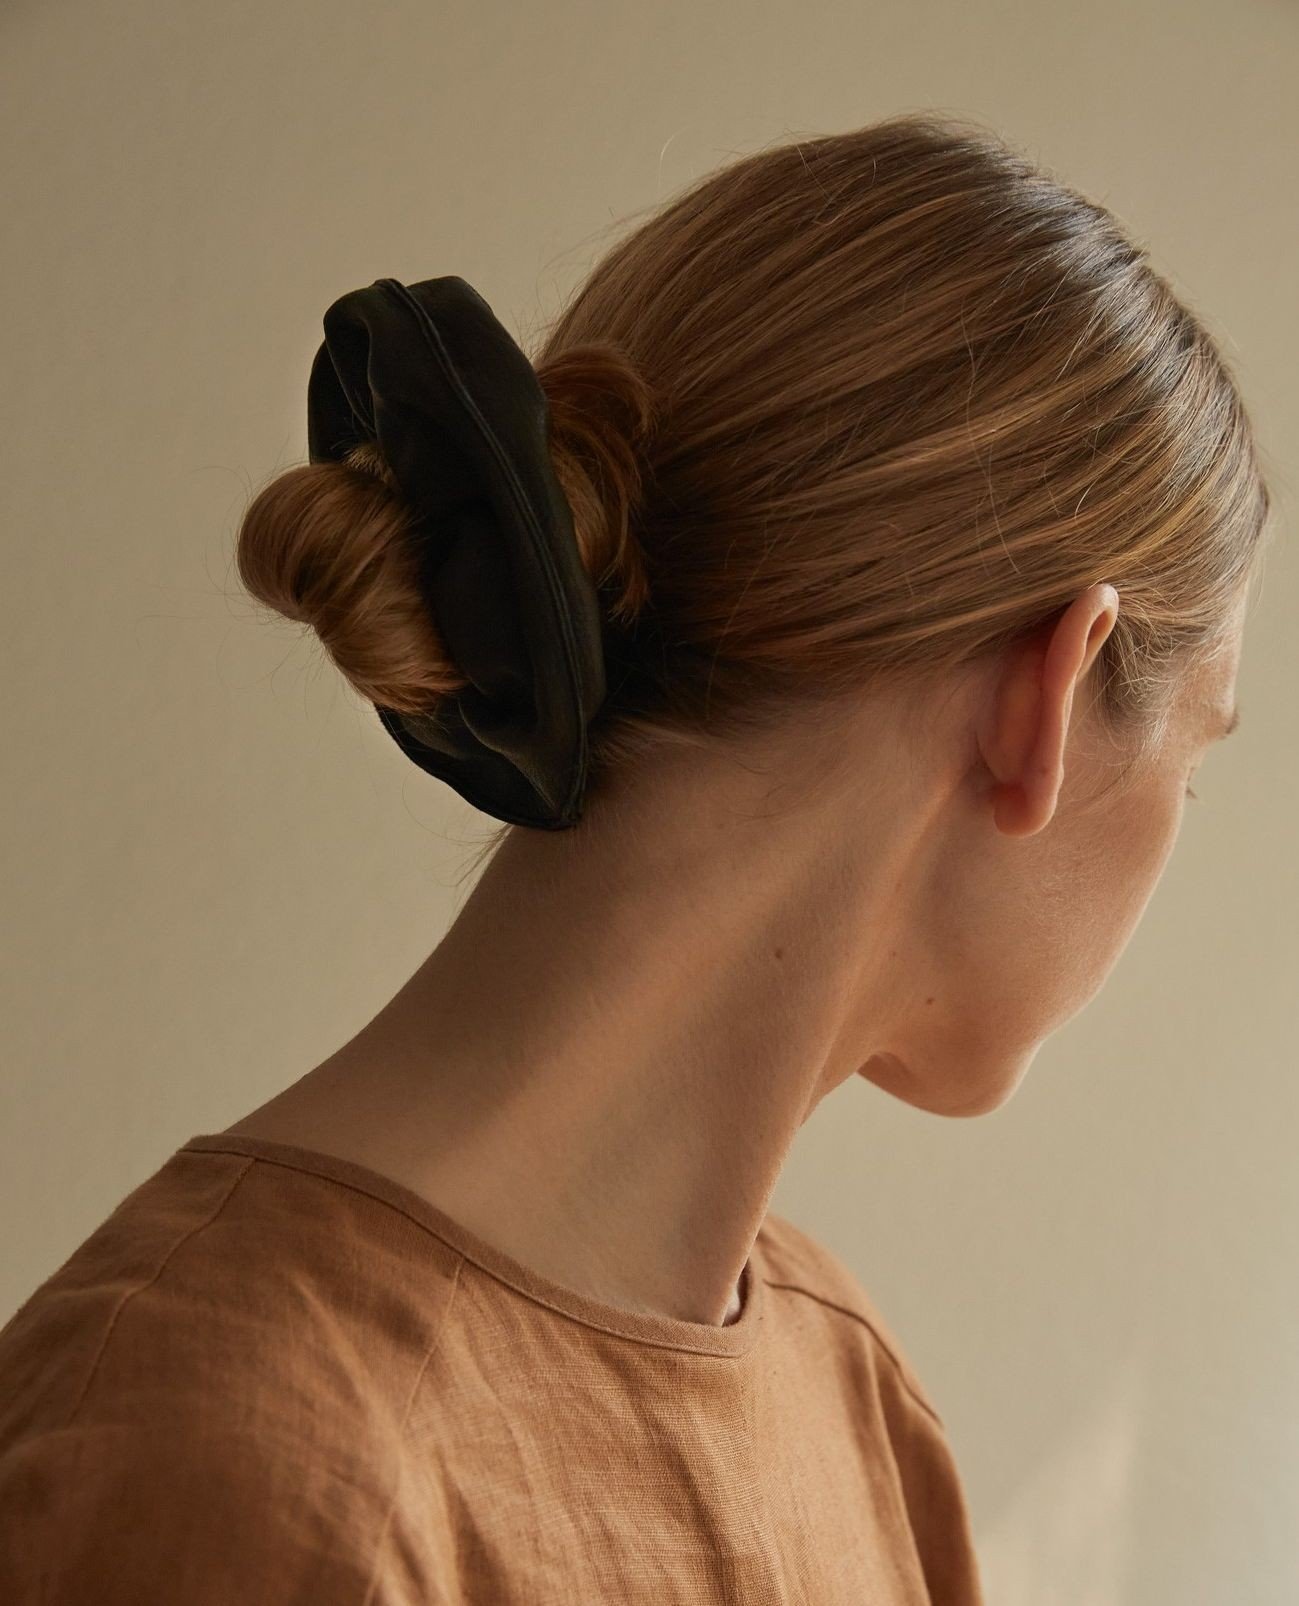 Whoever said we must &quot;let our hair down&quot; to have a good time must have been mistaken. I'd like to think that it's when I tie my hair up, that I am ready to take on the world...⁠
⁠
The MARAI Scrunchie comes in natural and black vegetable tan